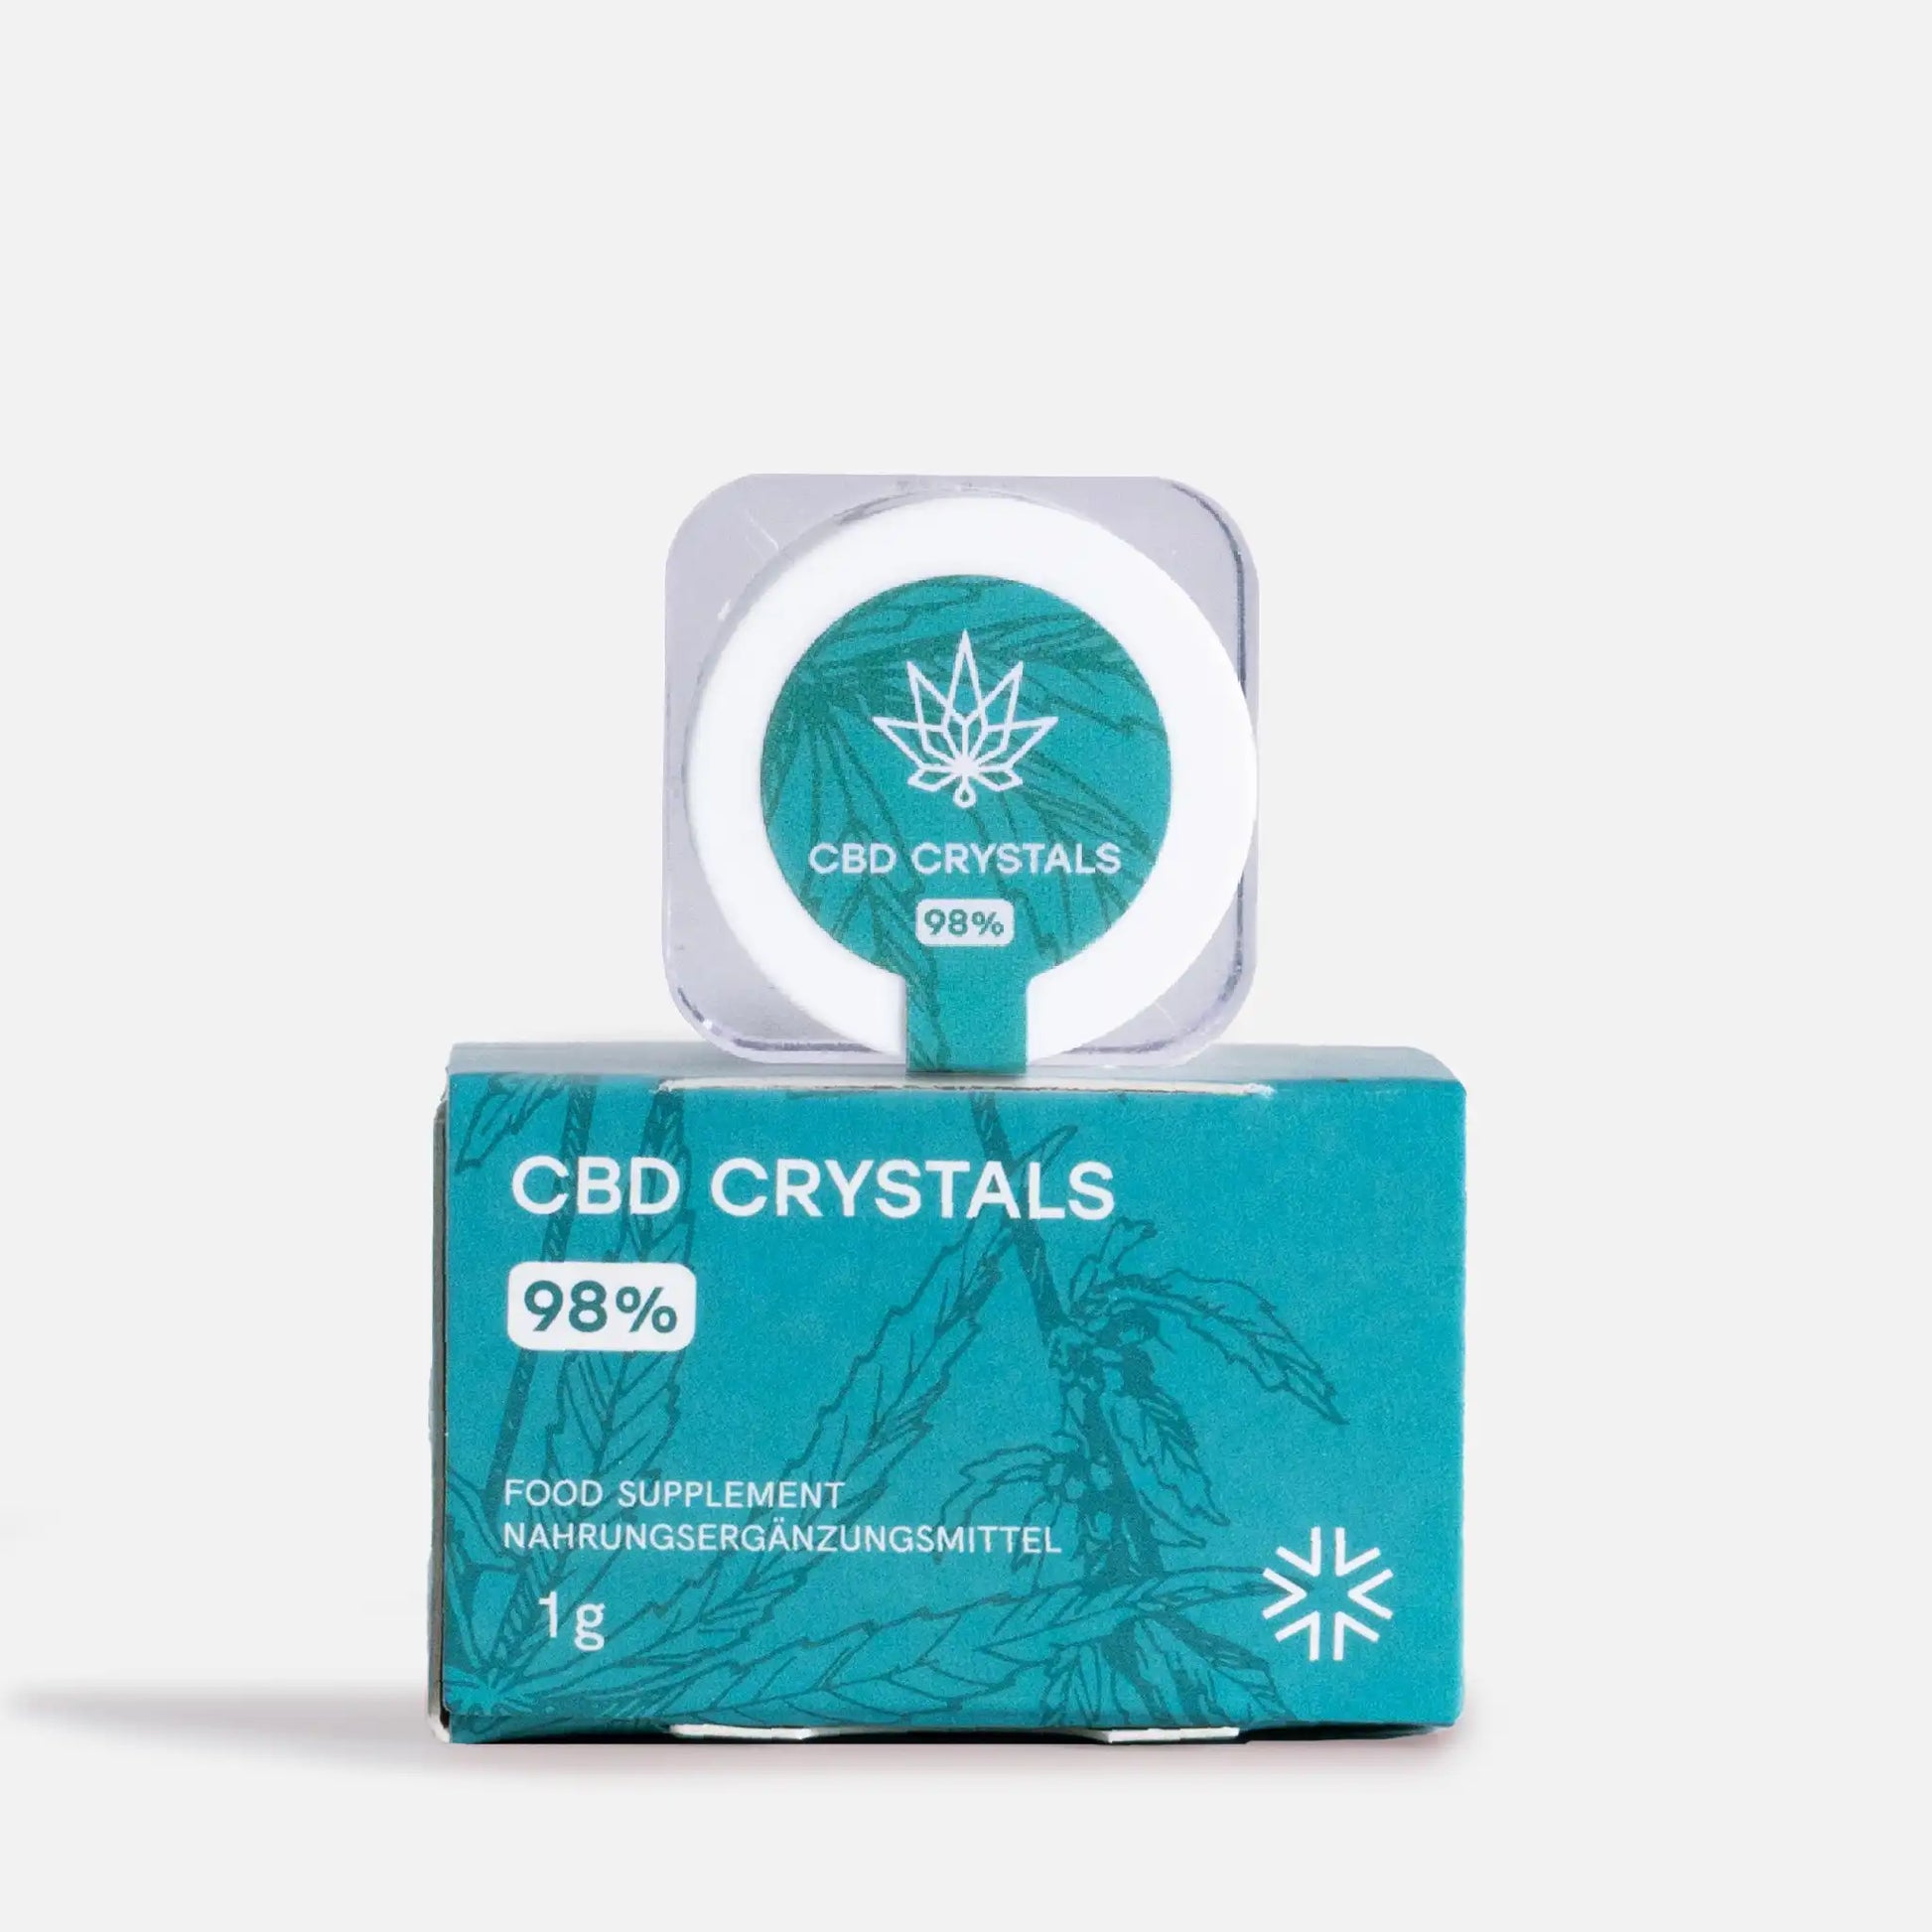 PACK OF CBD CRYSTALS